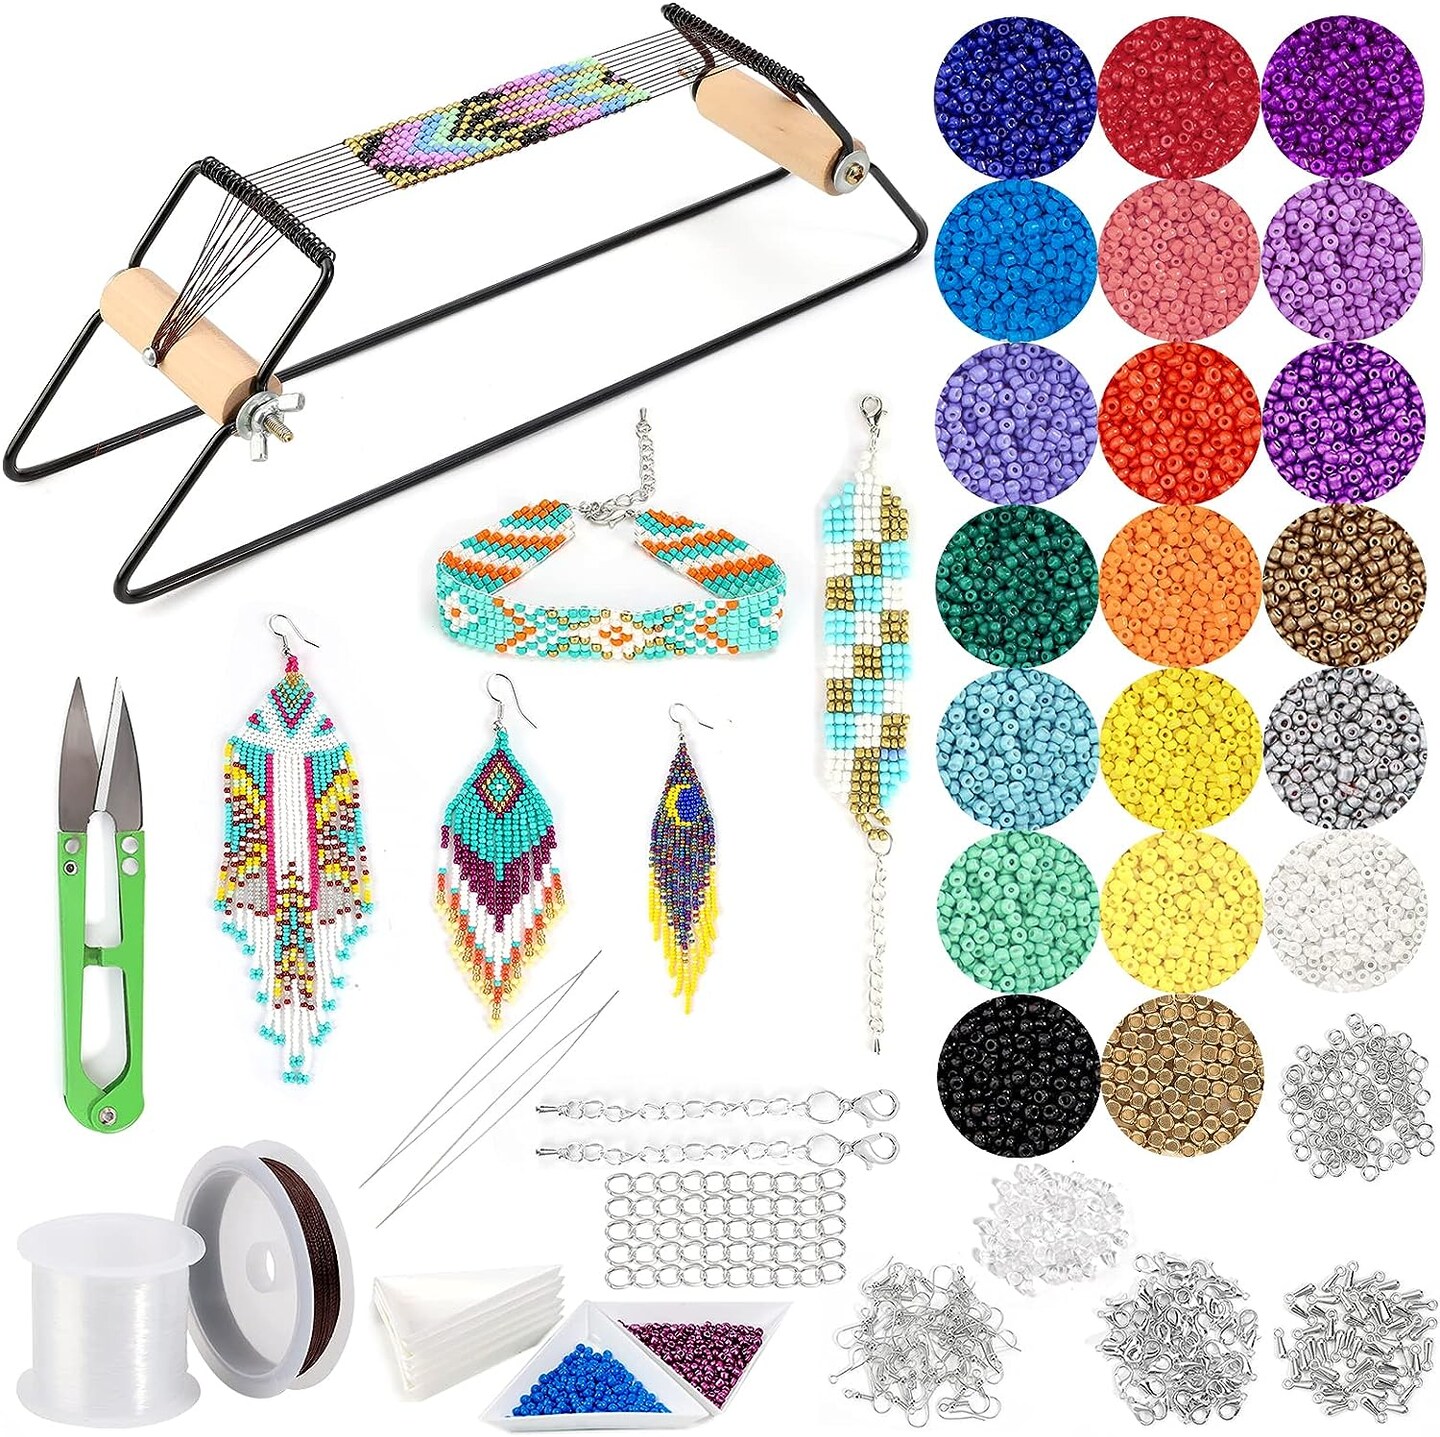 Bead Loom Kit, Beading Supplies with 9700 PCS Seed Beads, Tray, Scissors Making Accessories, Beading Loom Kits for Adults Jewelry Making Bracelets Belts